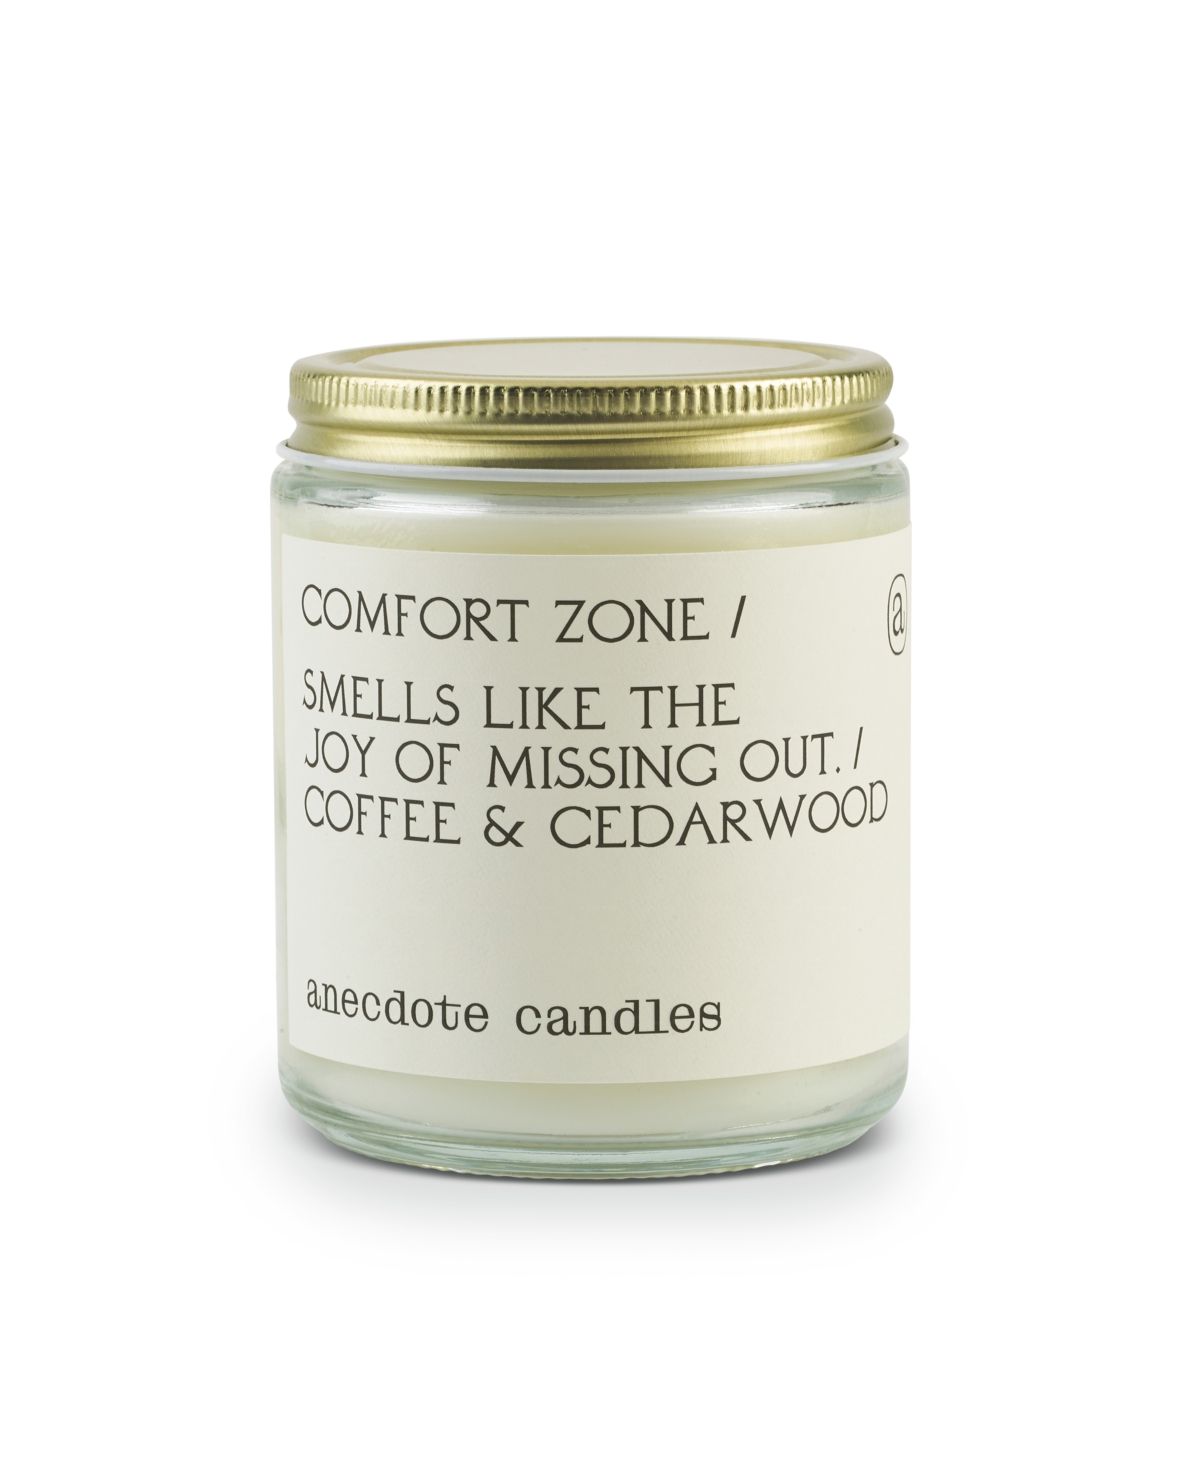 Anecdote Candles Comfort Zone Candle | Macys (US)